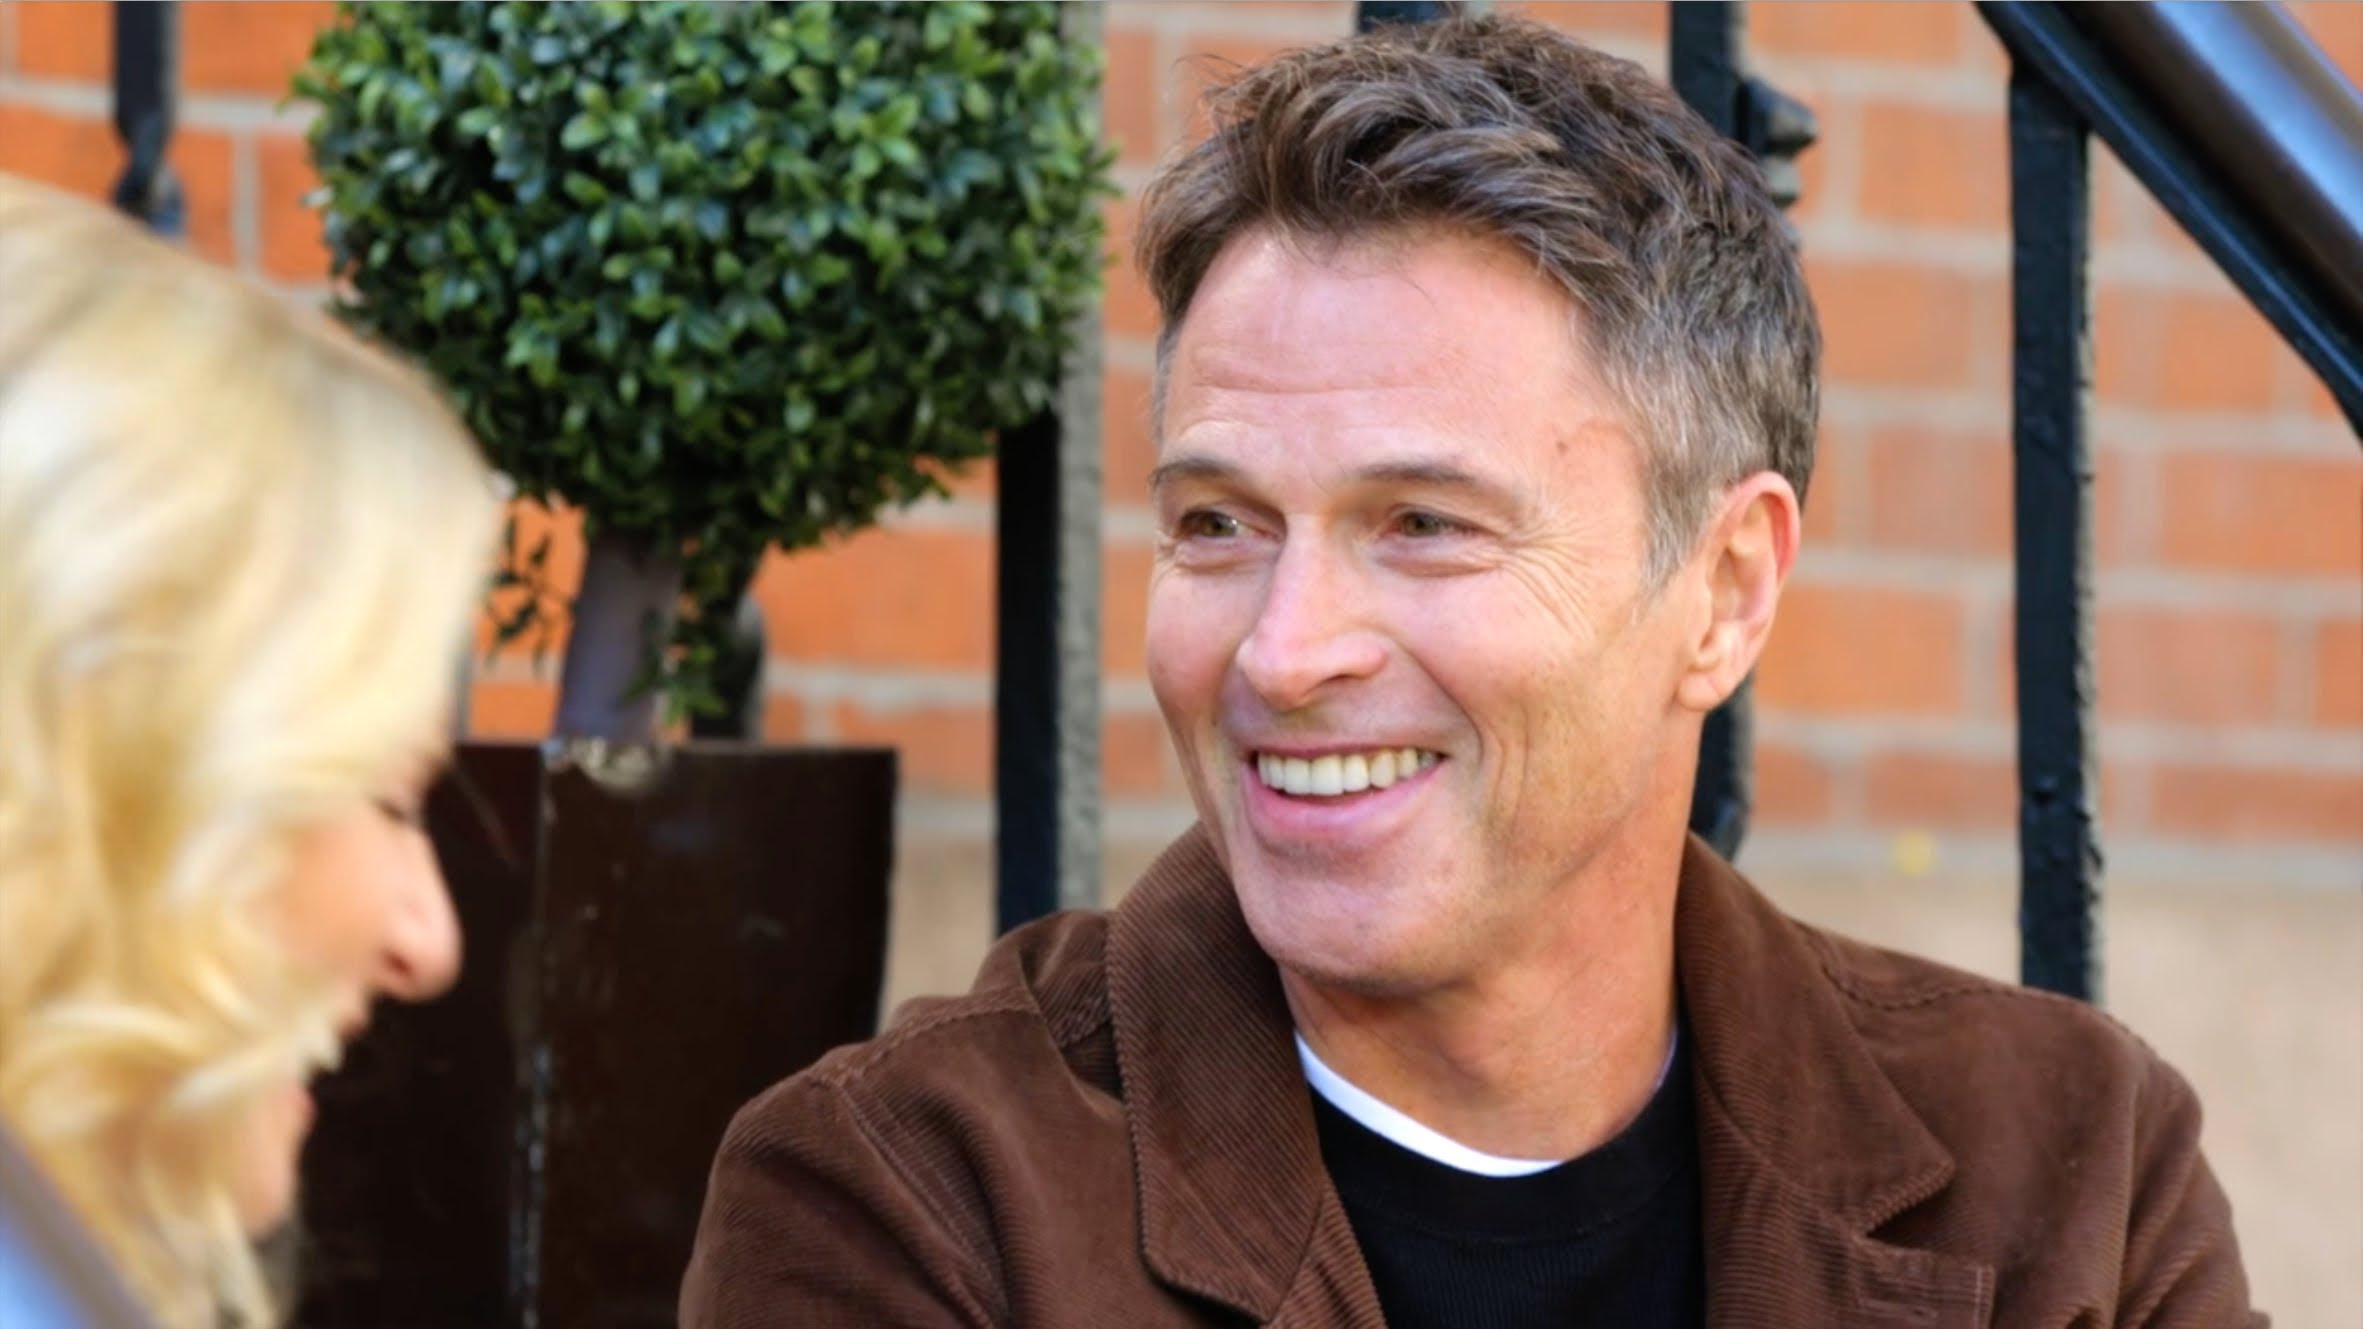 Tim Daly HD Wallpapers | 7wallpapers.net